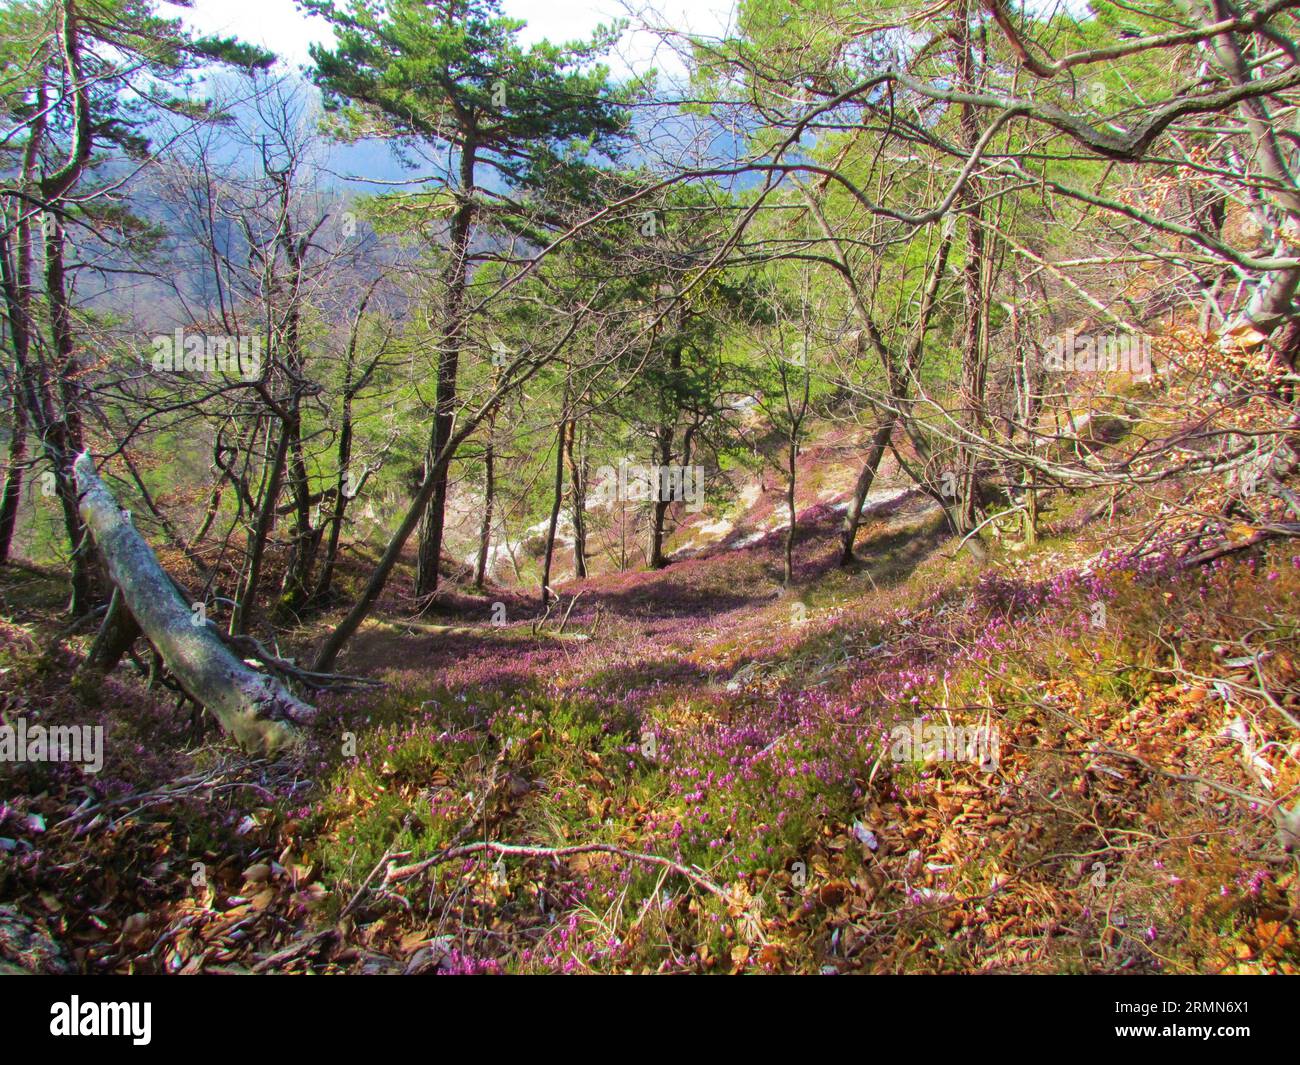 Scots pine forest in Slovenia with pink flowering winter heath, spring heath or alpine heath (Erica carnea) covering the ground Stock Photo